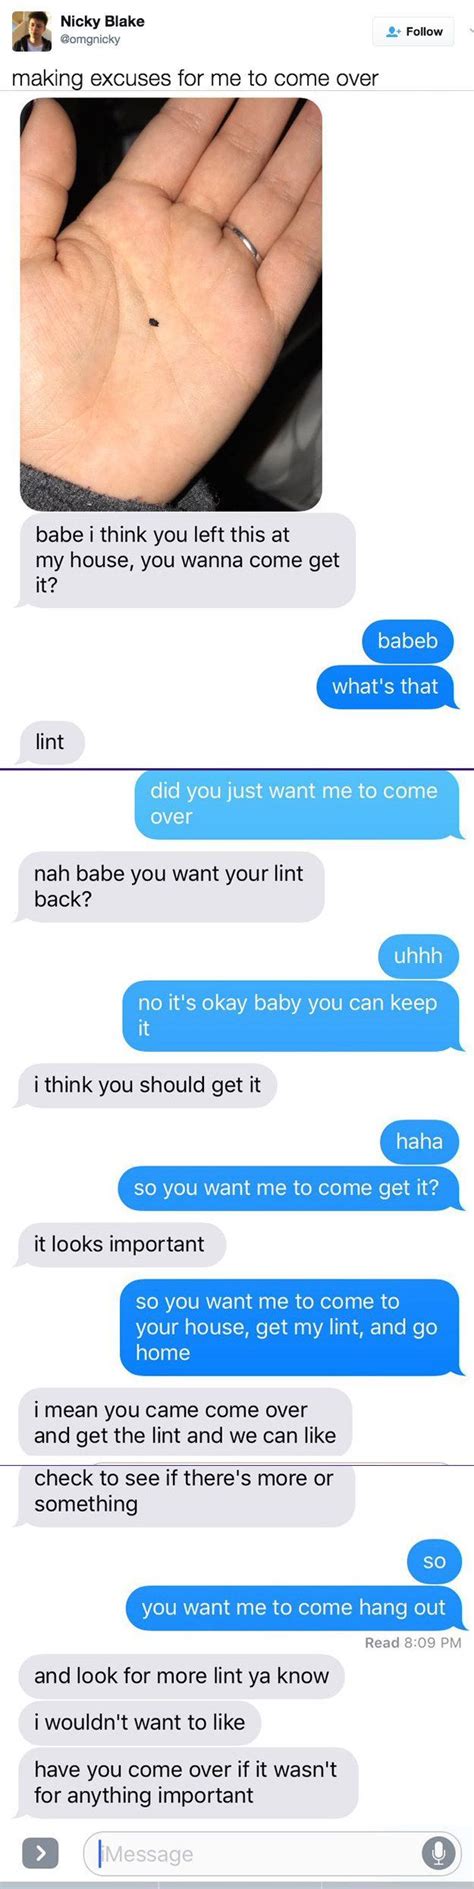 This couple who clearly really want to hang out. | Funny couples texts ...